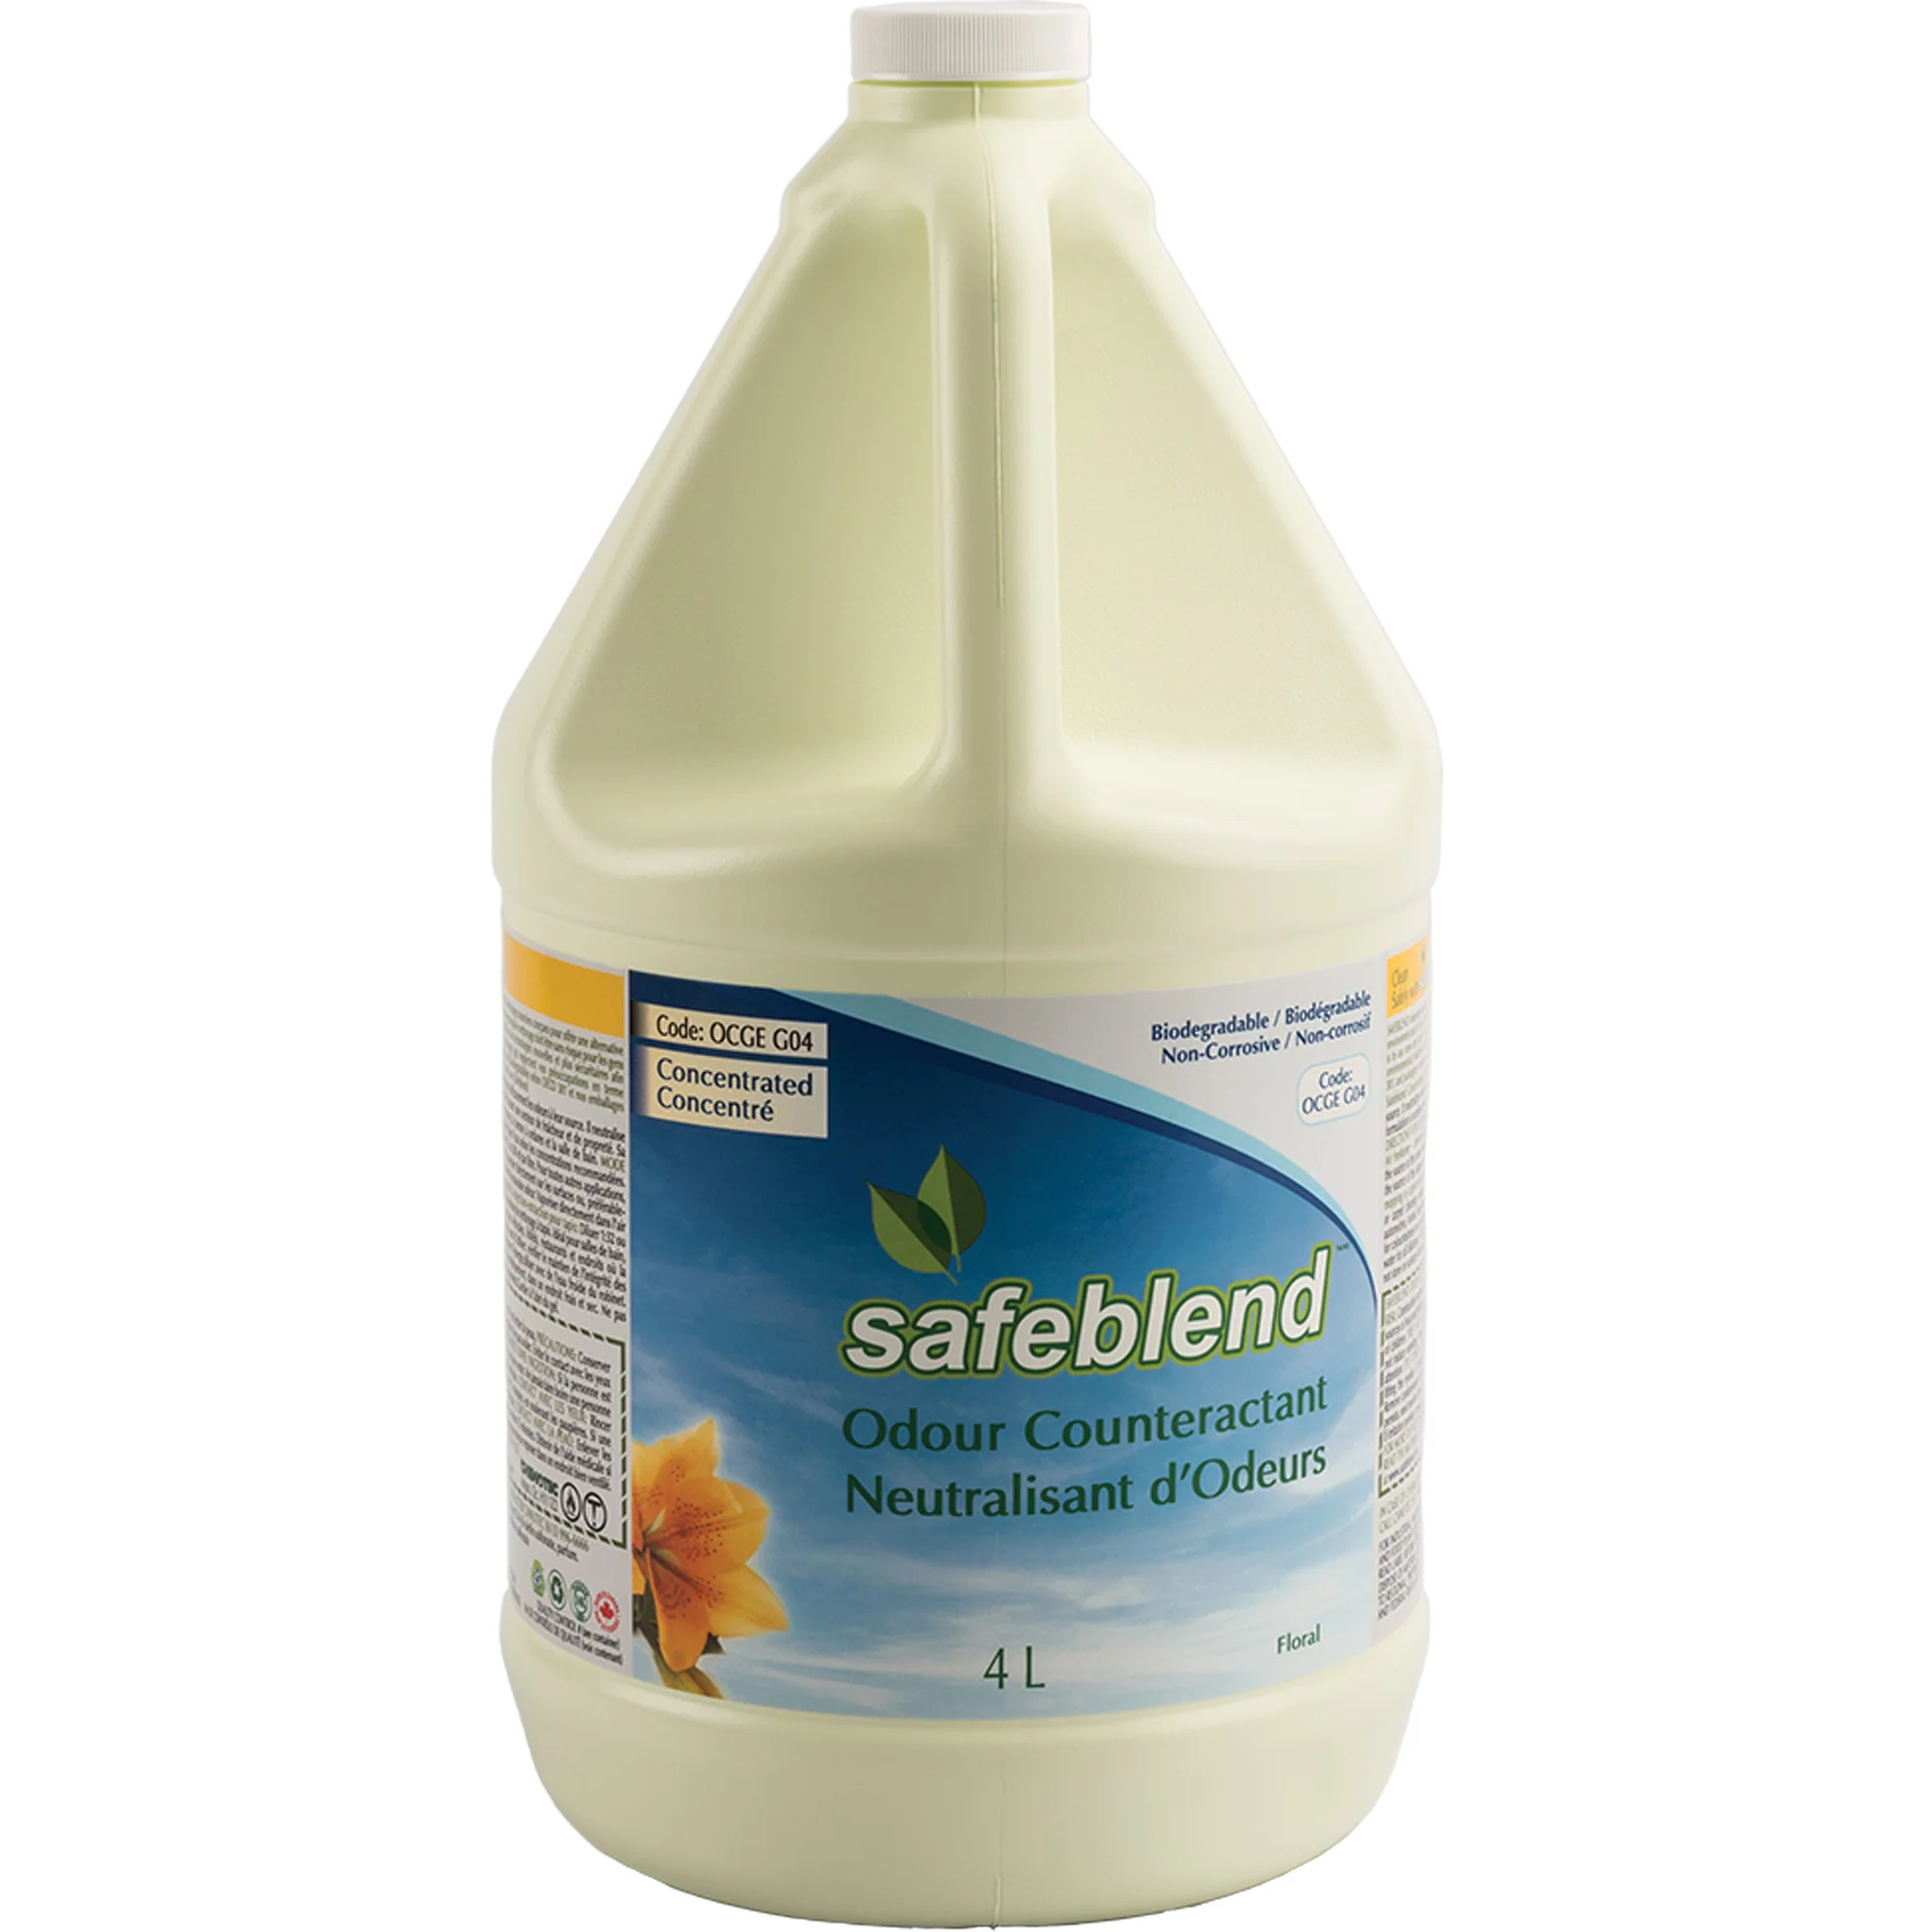 4 Litre bottle of safeblend odour counteractant deodorizing spray sold by haddon chemicals and equipment in delta bc